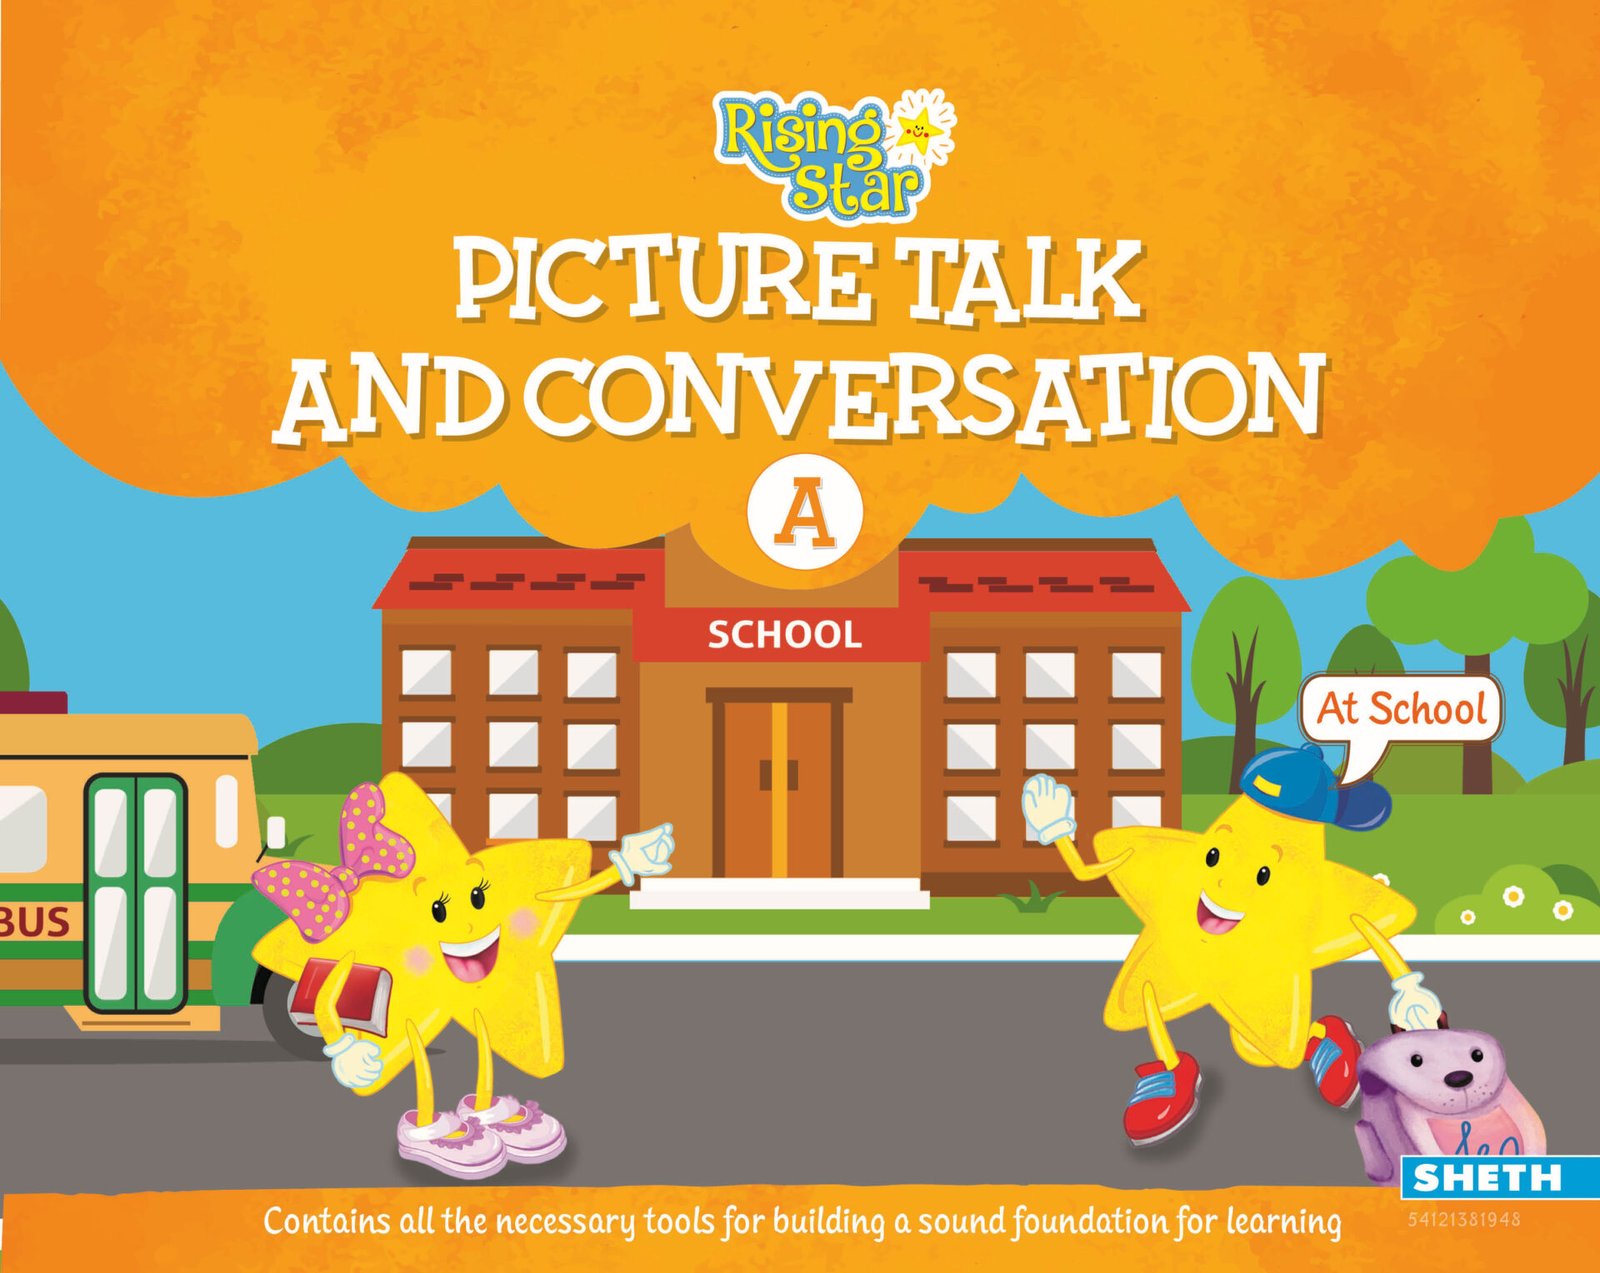 Rising Star Picture Talk and Conversation A 1 1